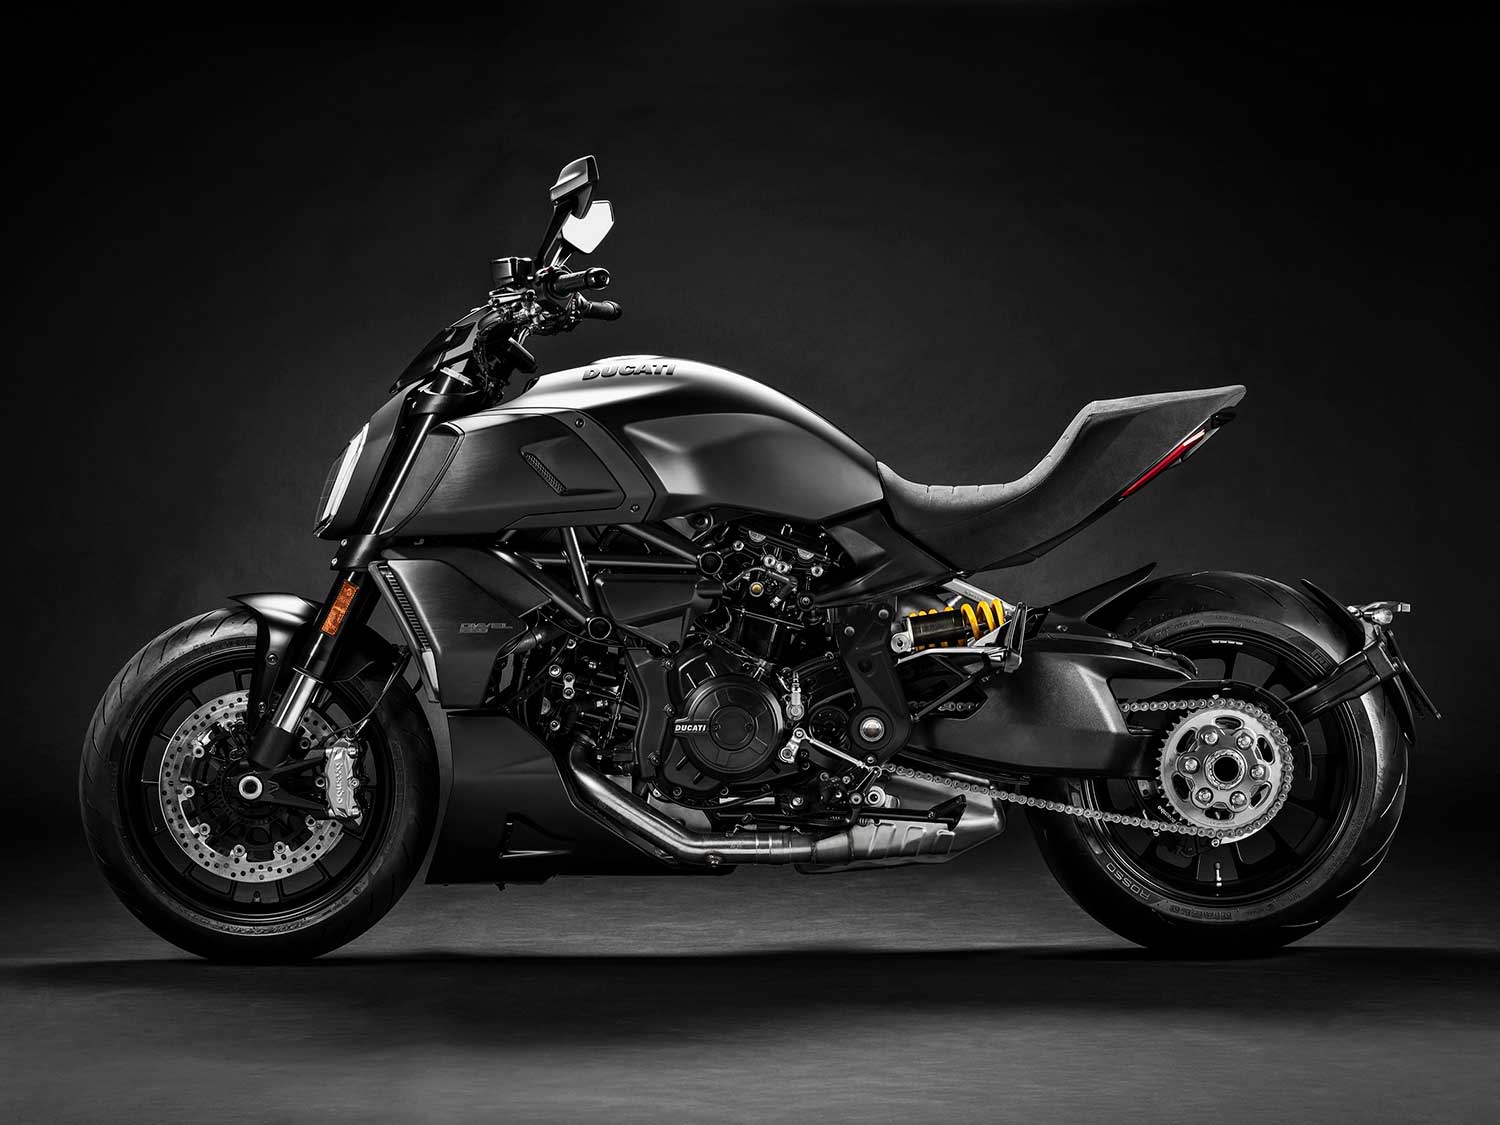 On the standard 1260 Diavel you’ll find a 50mm inverted fork and a Sachs rear shock, and for 2020, a new Dark Stealth color (or mono-color) option.